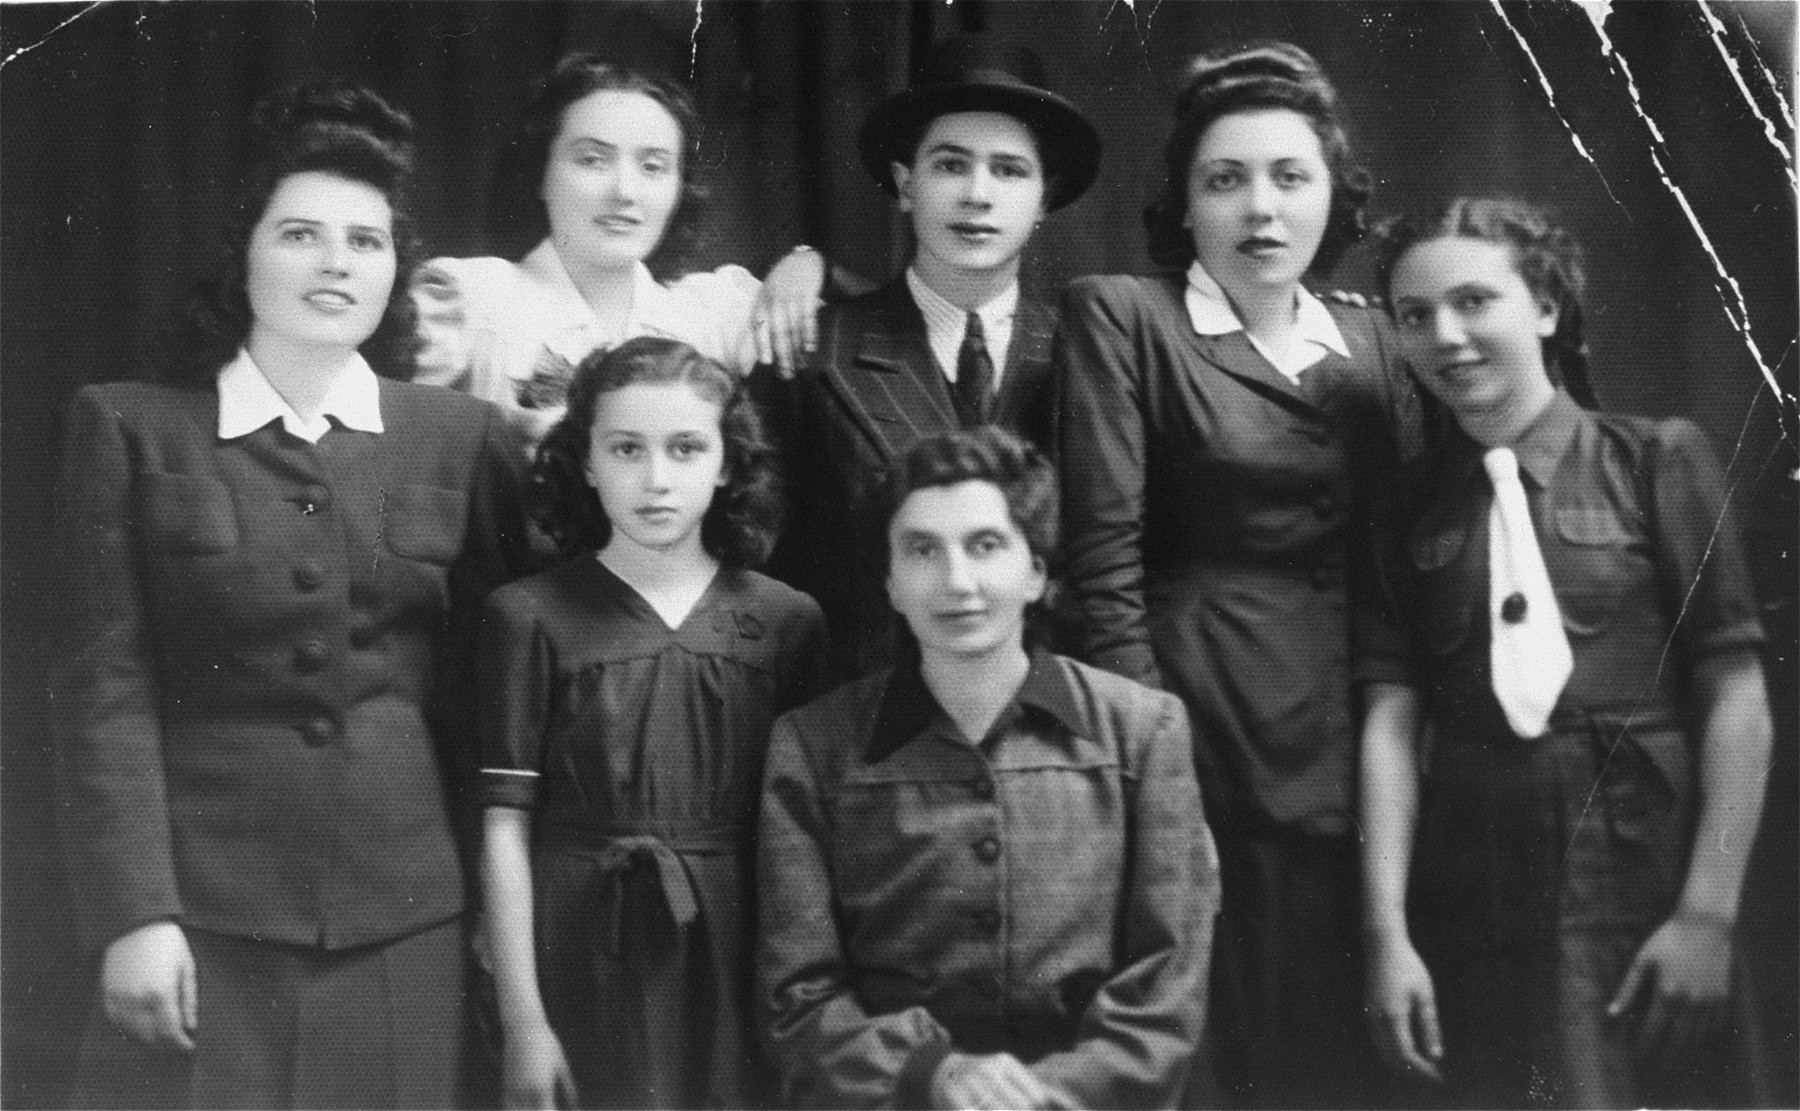 Group portrait of members of the Katz family in Munkacs.

Pictured in the bottom row (from left to right) are: Helen and Tereza Katz; top row: Chicha. Isabella; Philip, Jolon (Cipi) and Regina Katz.